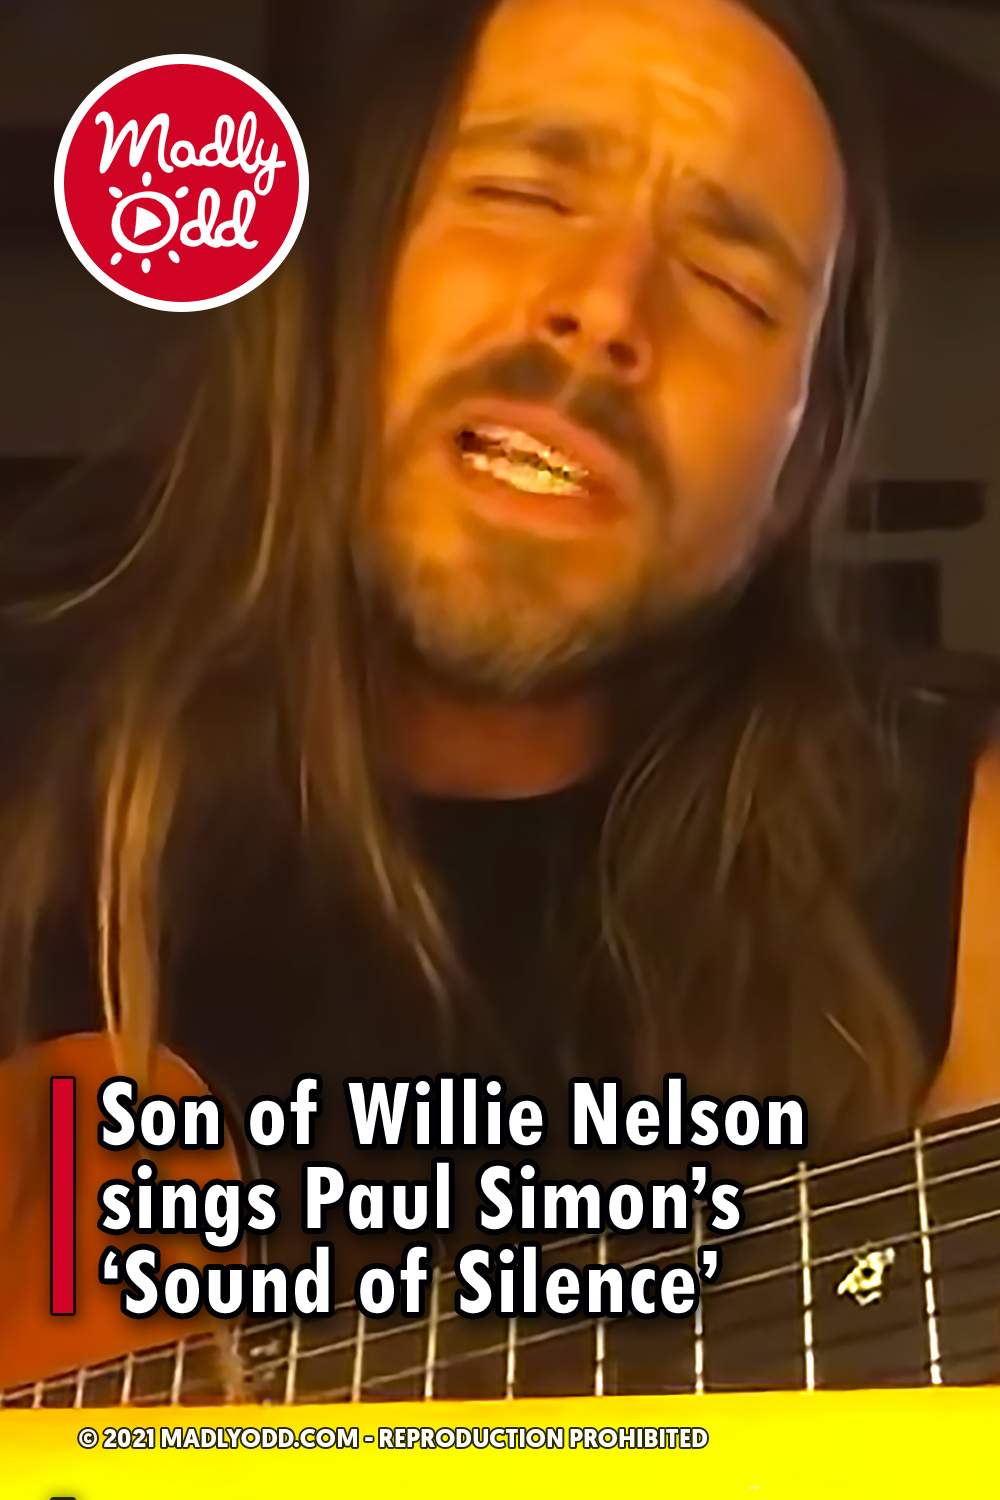 Son of Willie Nelson sings Paul Simon’s ‘Sound of Silence’